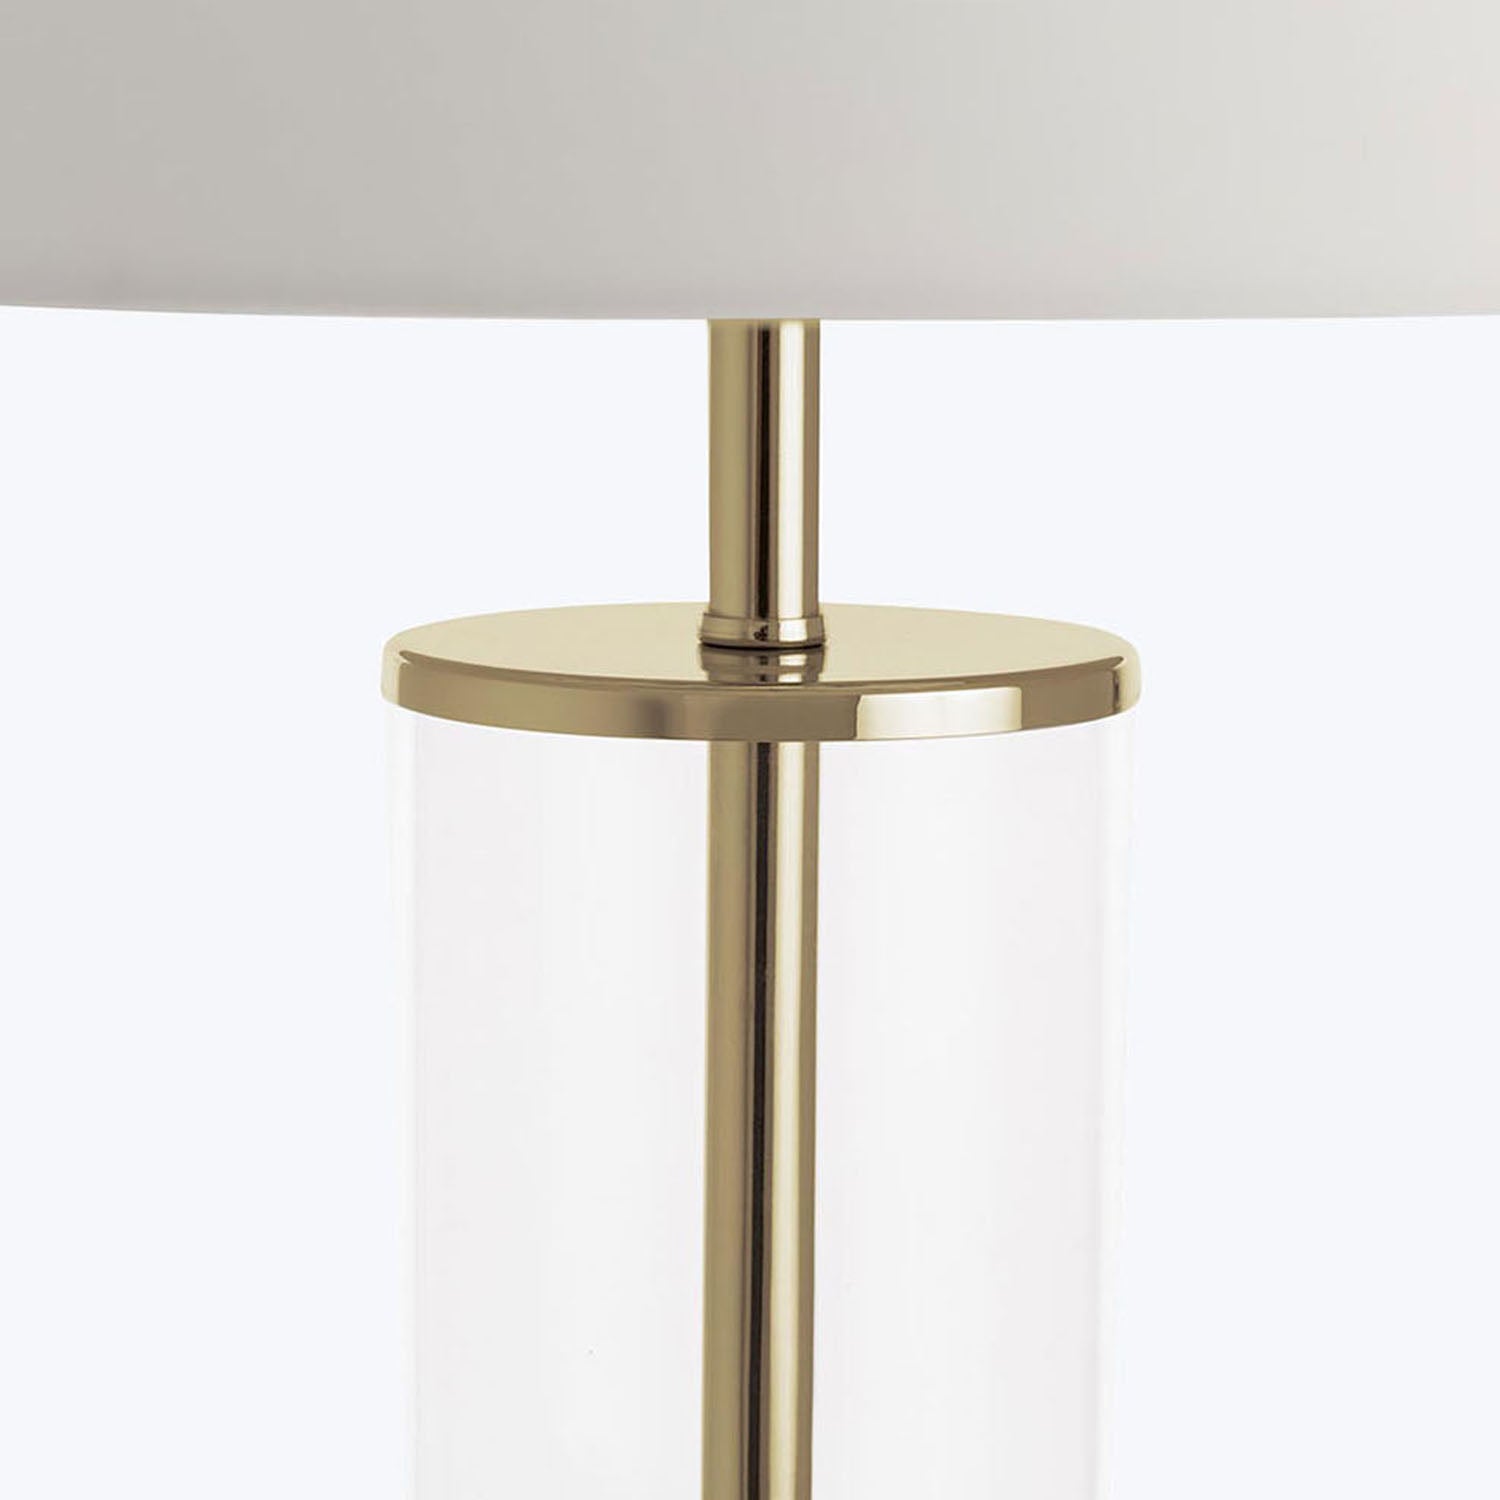 Modern lamp with gold finish and minimalistic design.